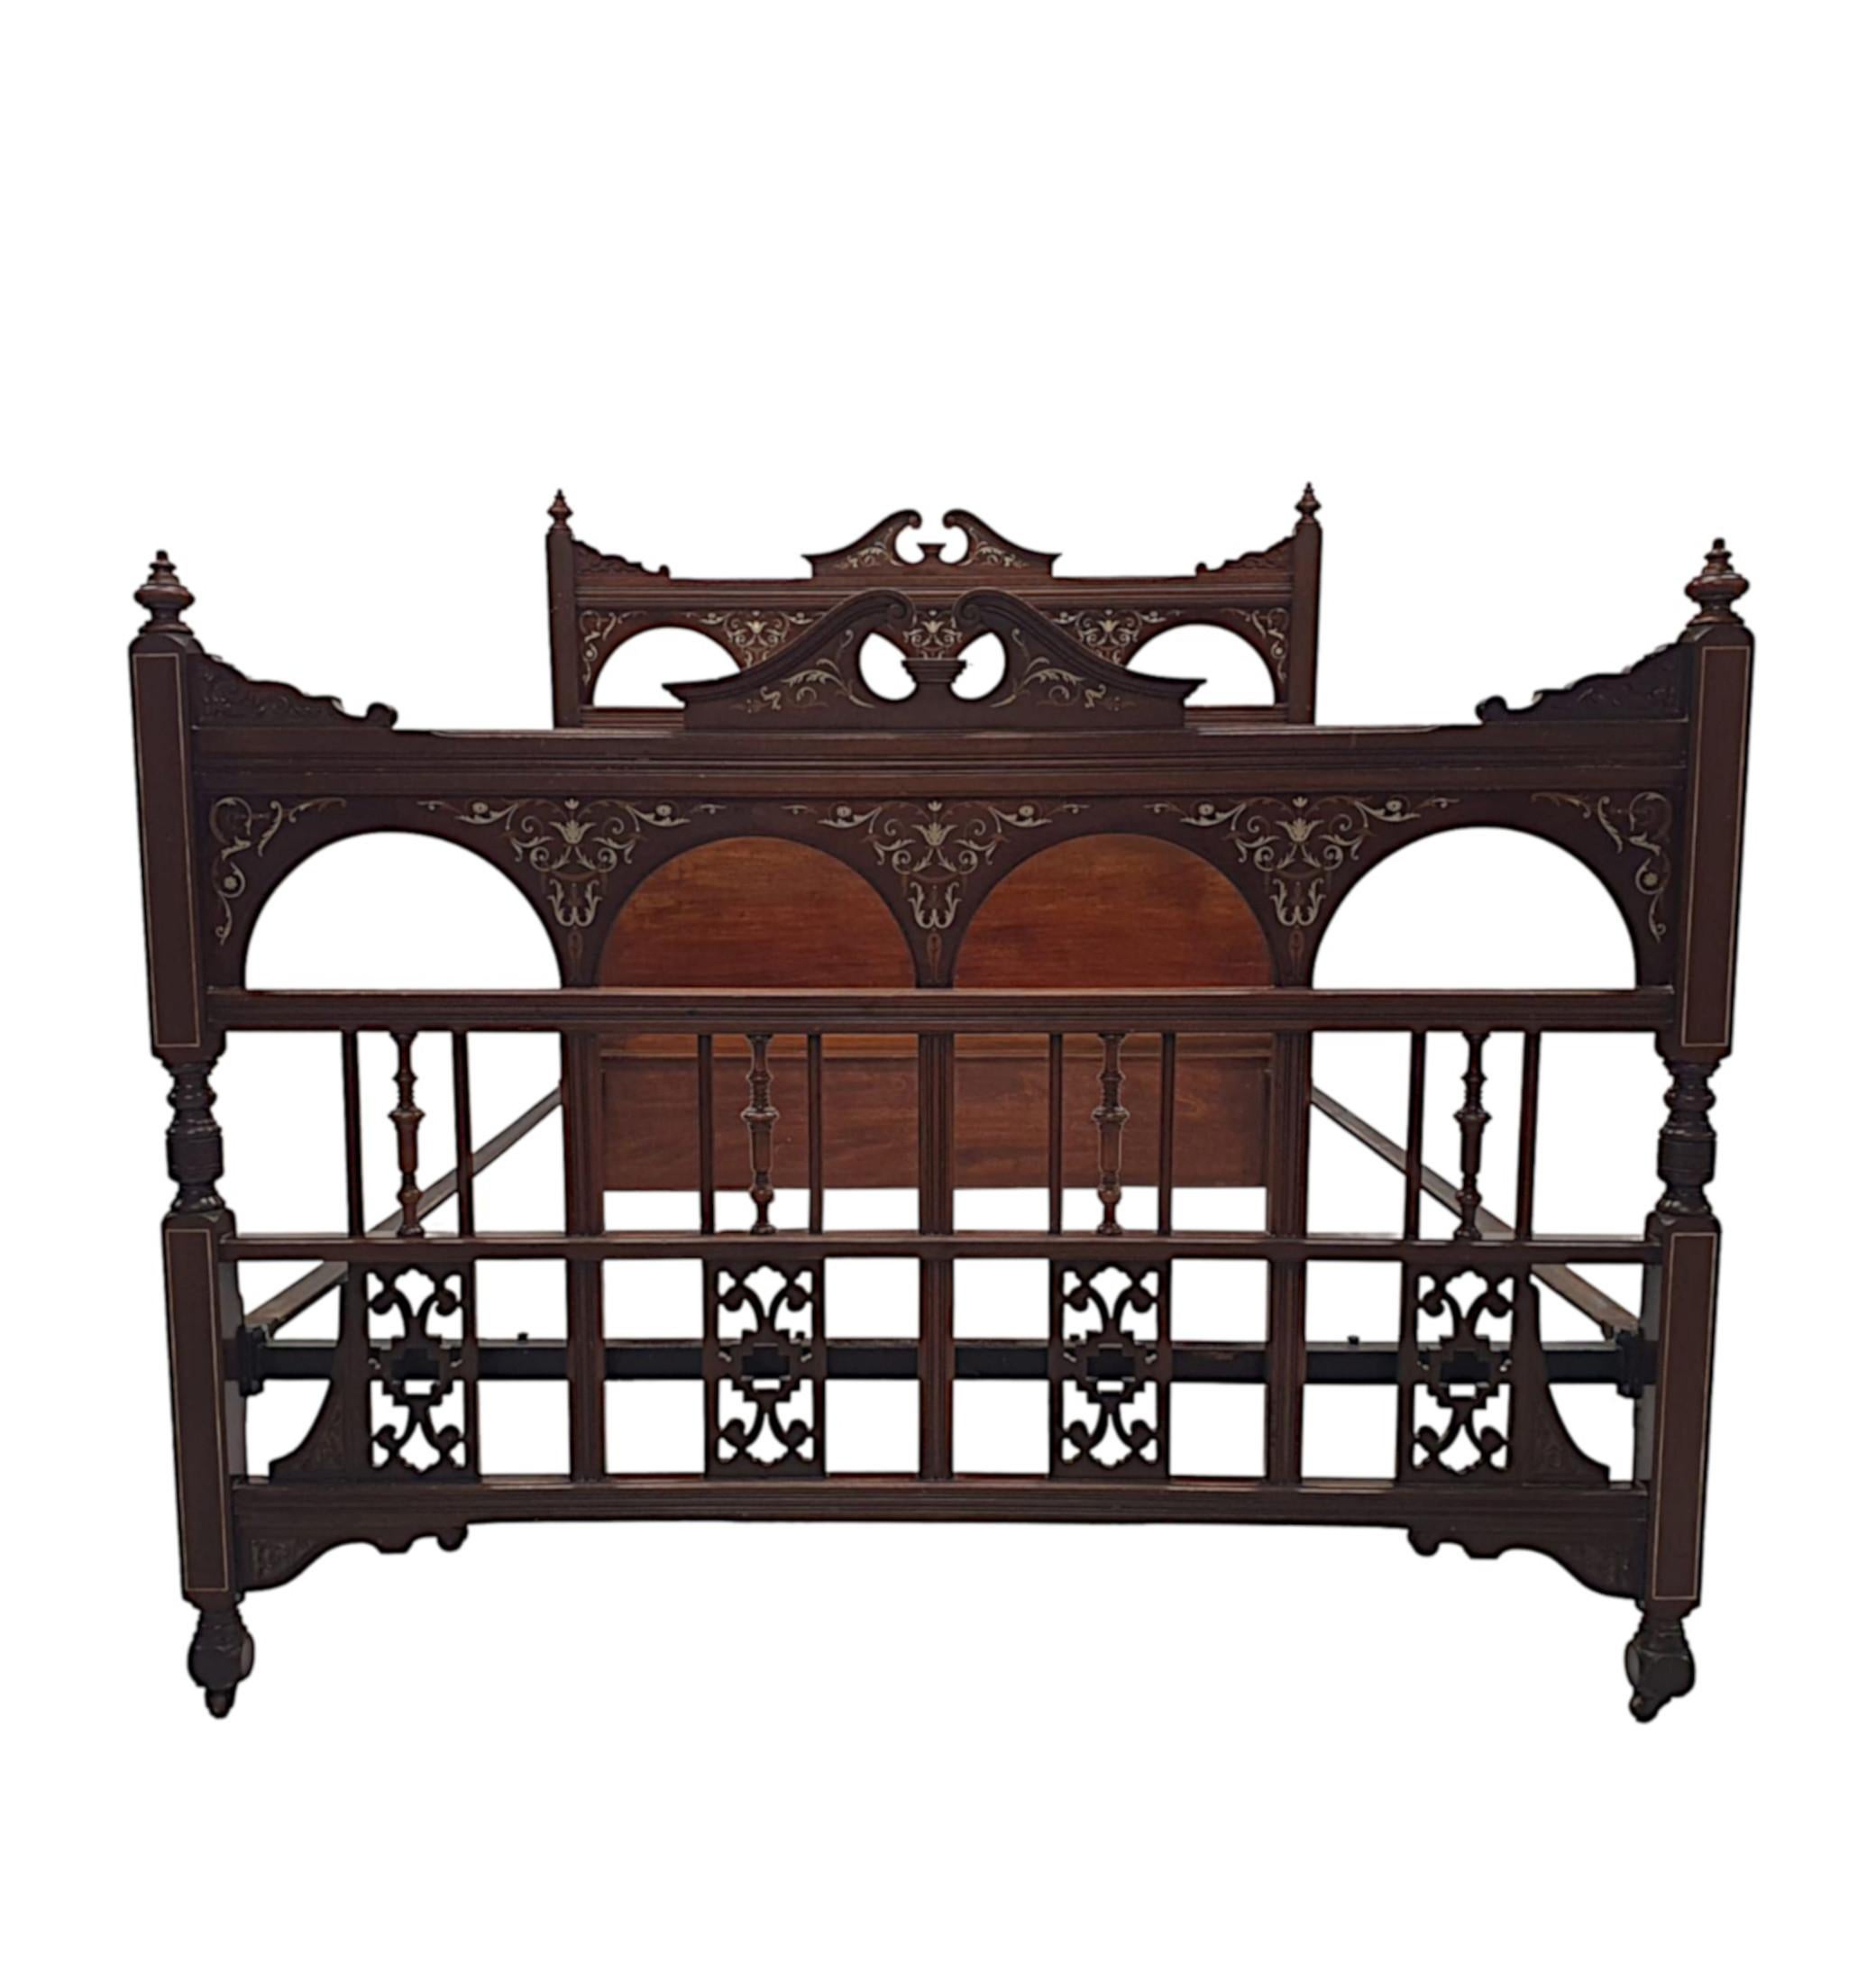 Mahogany Fabulous Late 19th Century Inlaid Bed For Sale